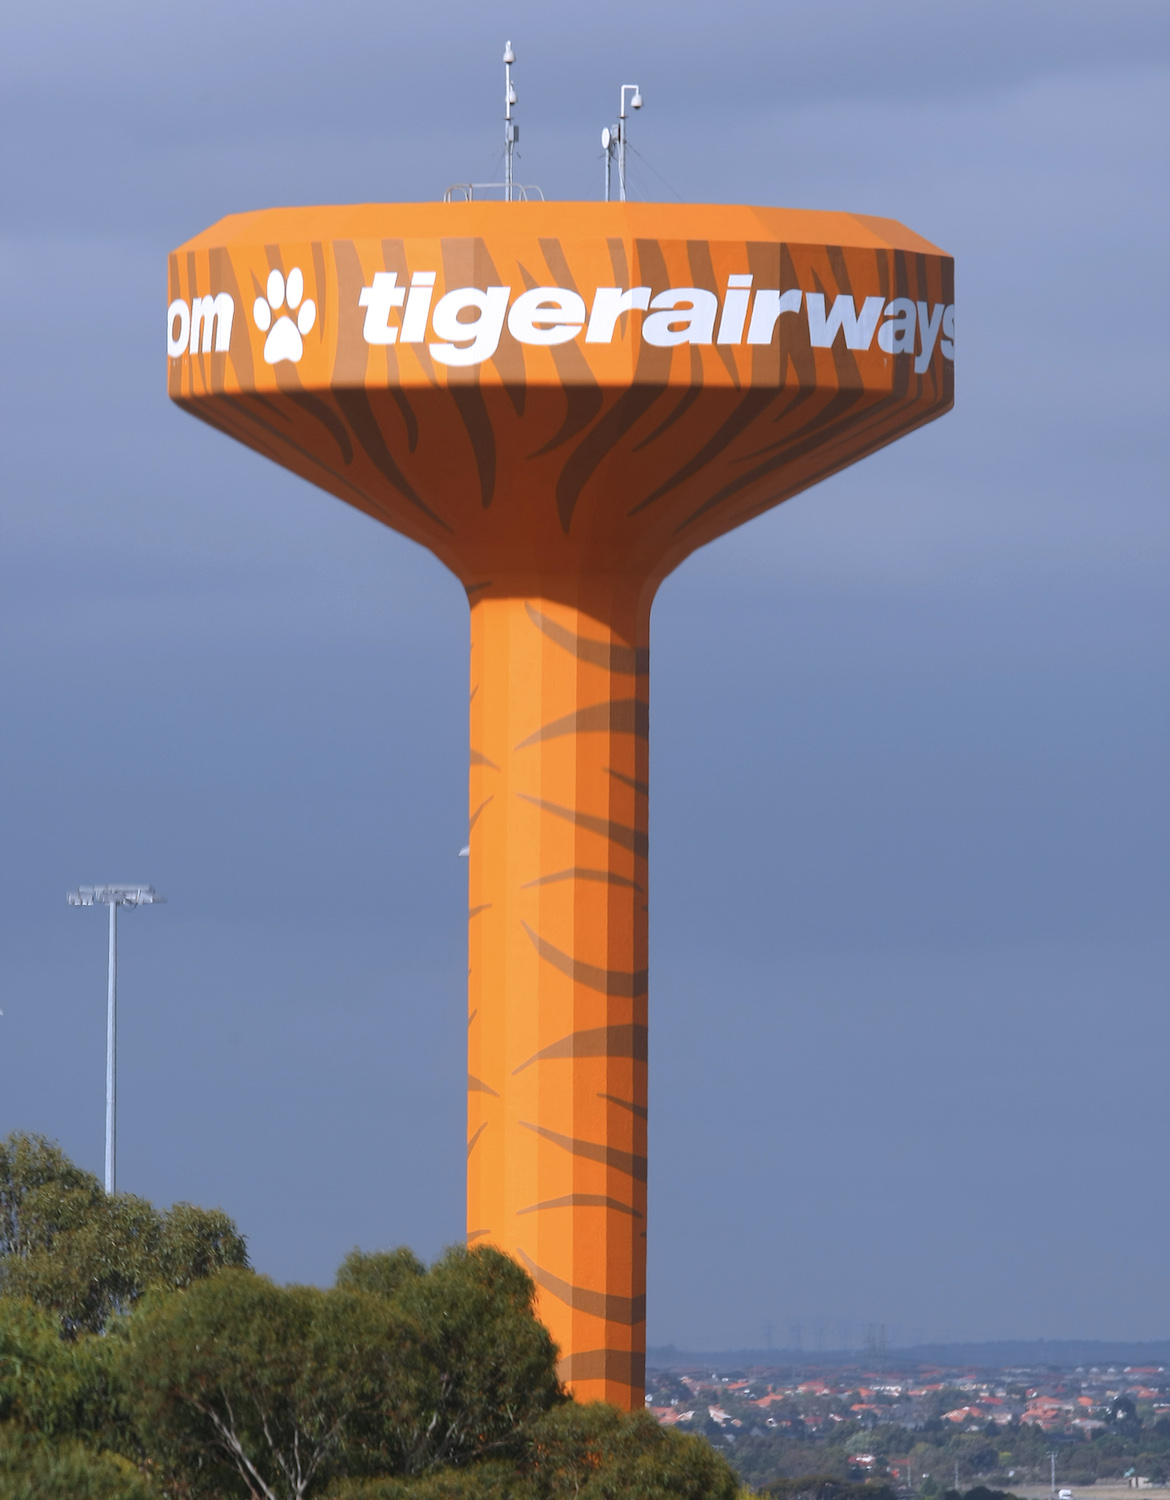 Melbourne Airport’s water tower was painted in Tiger Airways colours helping mark the location of Tiger’s terminal on the airport precinct. (Paul Sadler)